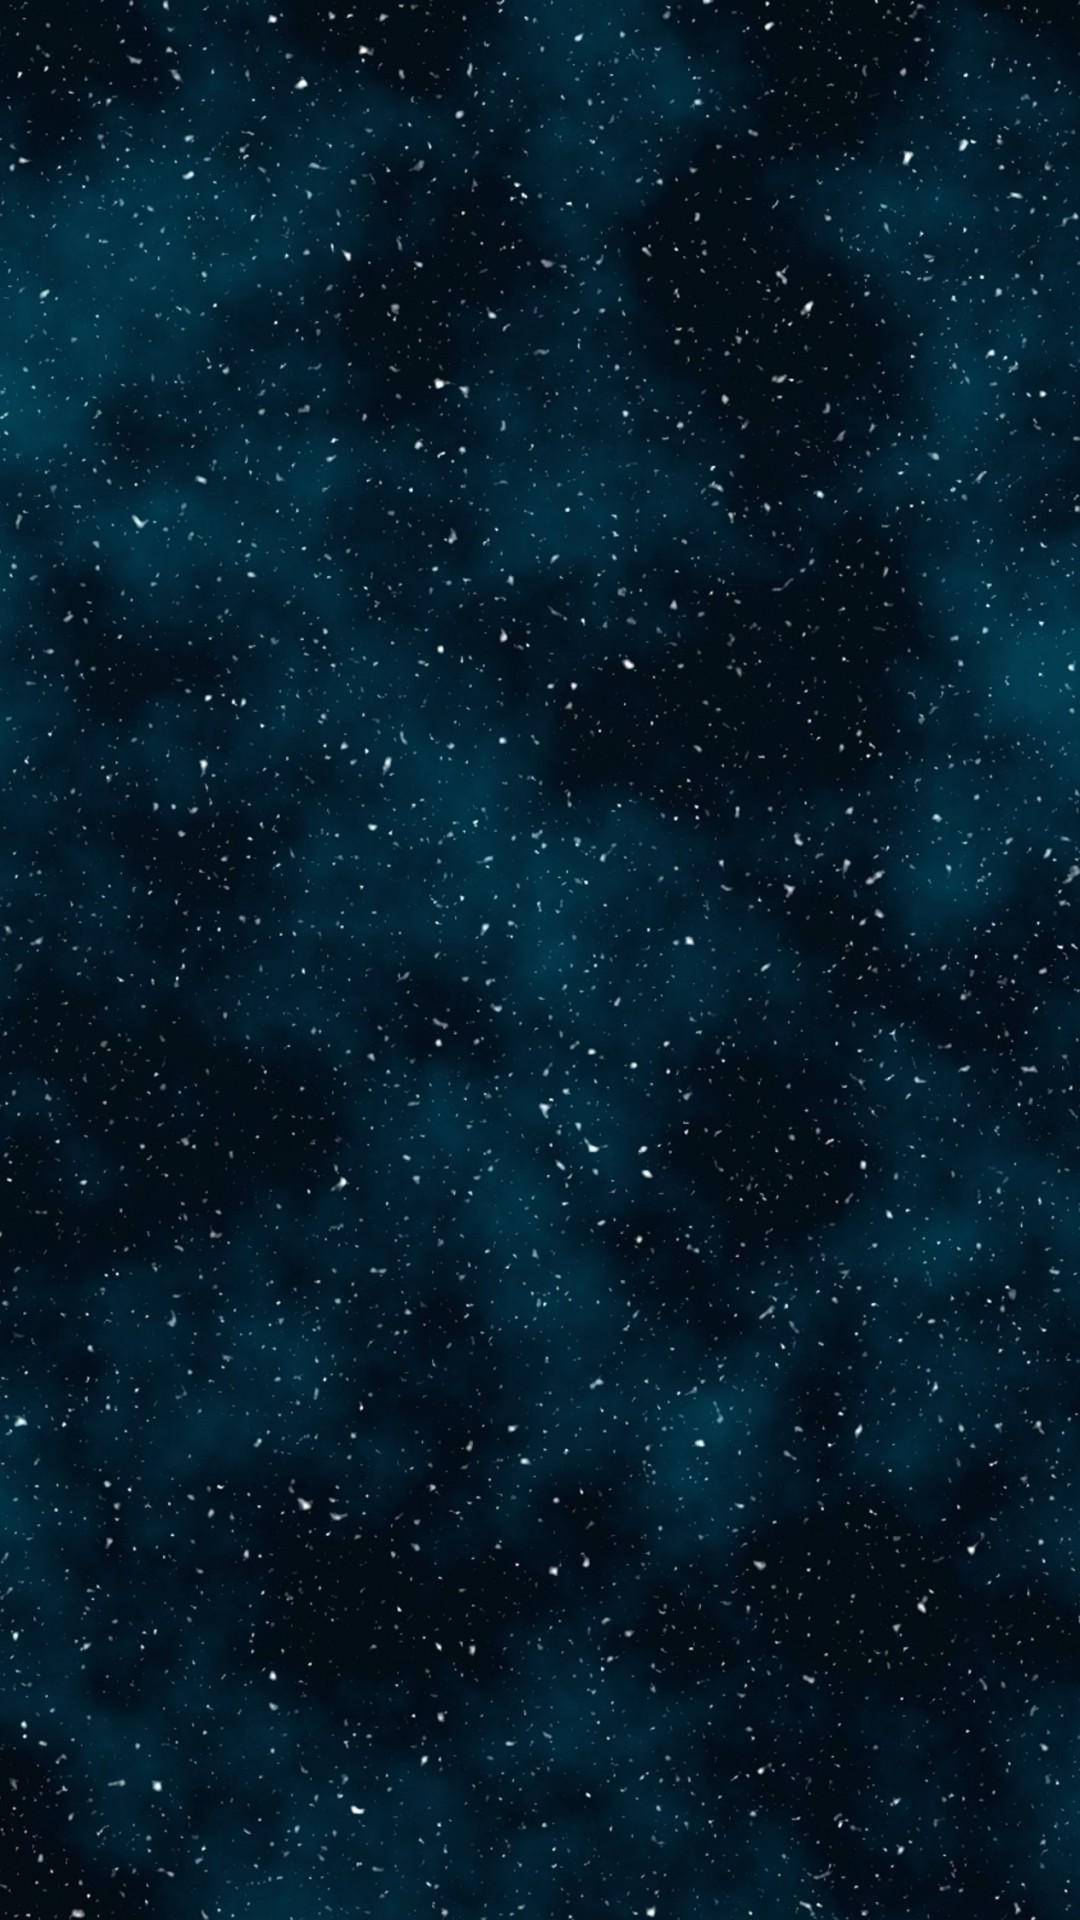 Blue Hazy Clouds Space Iphone Wallpaper